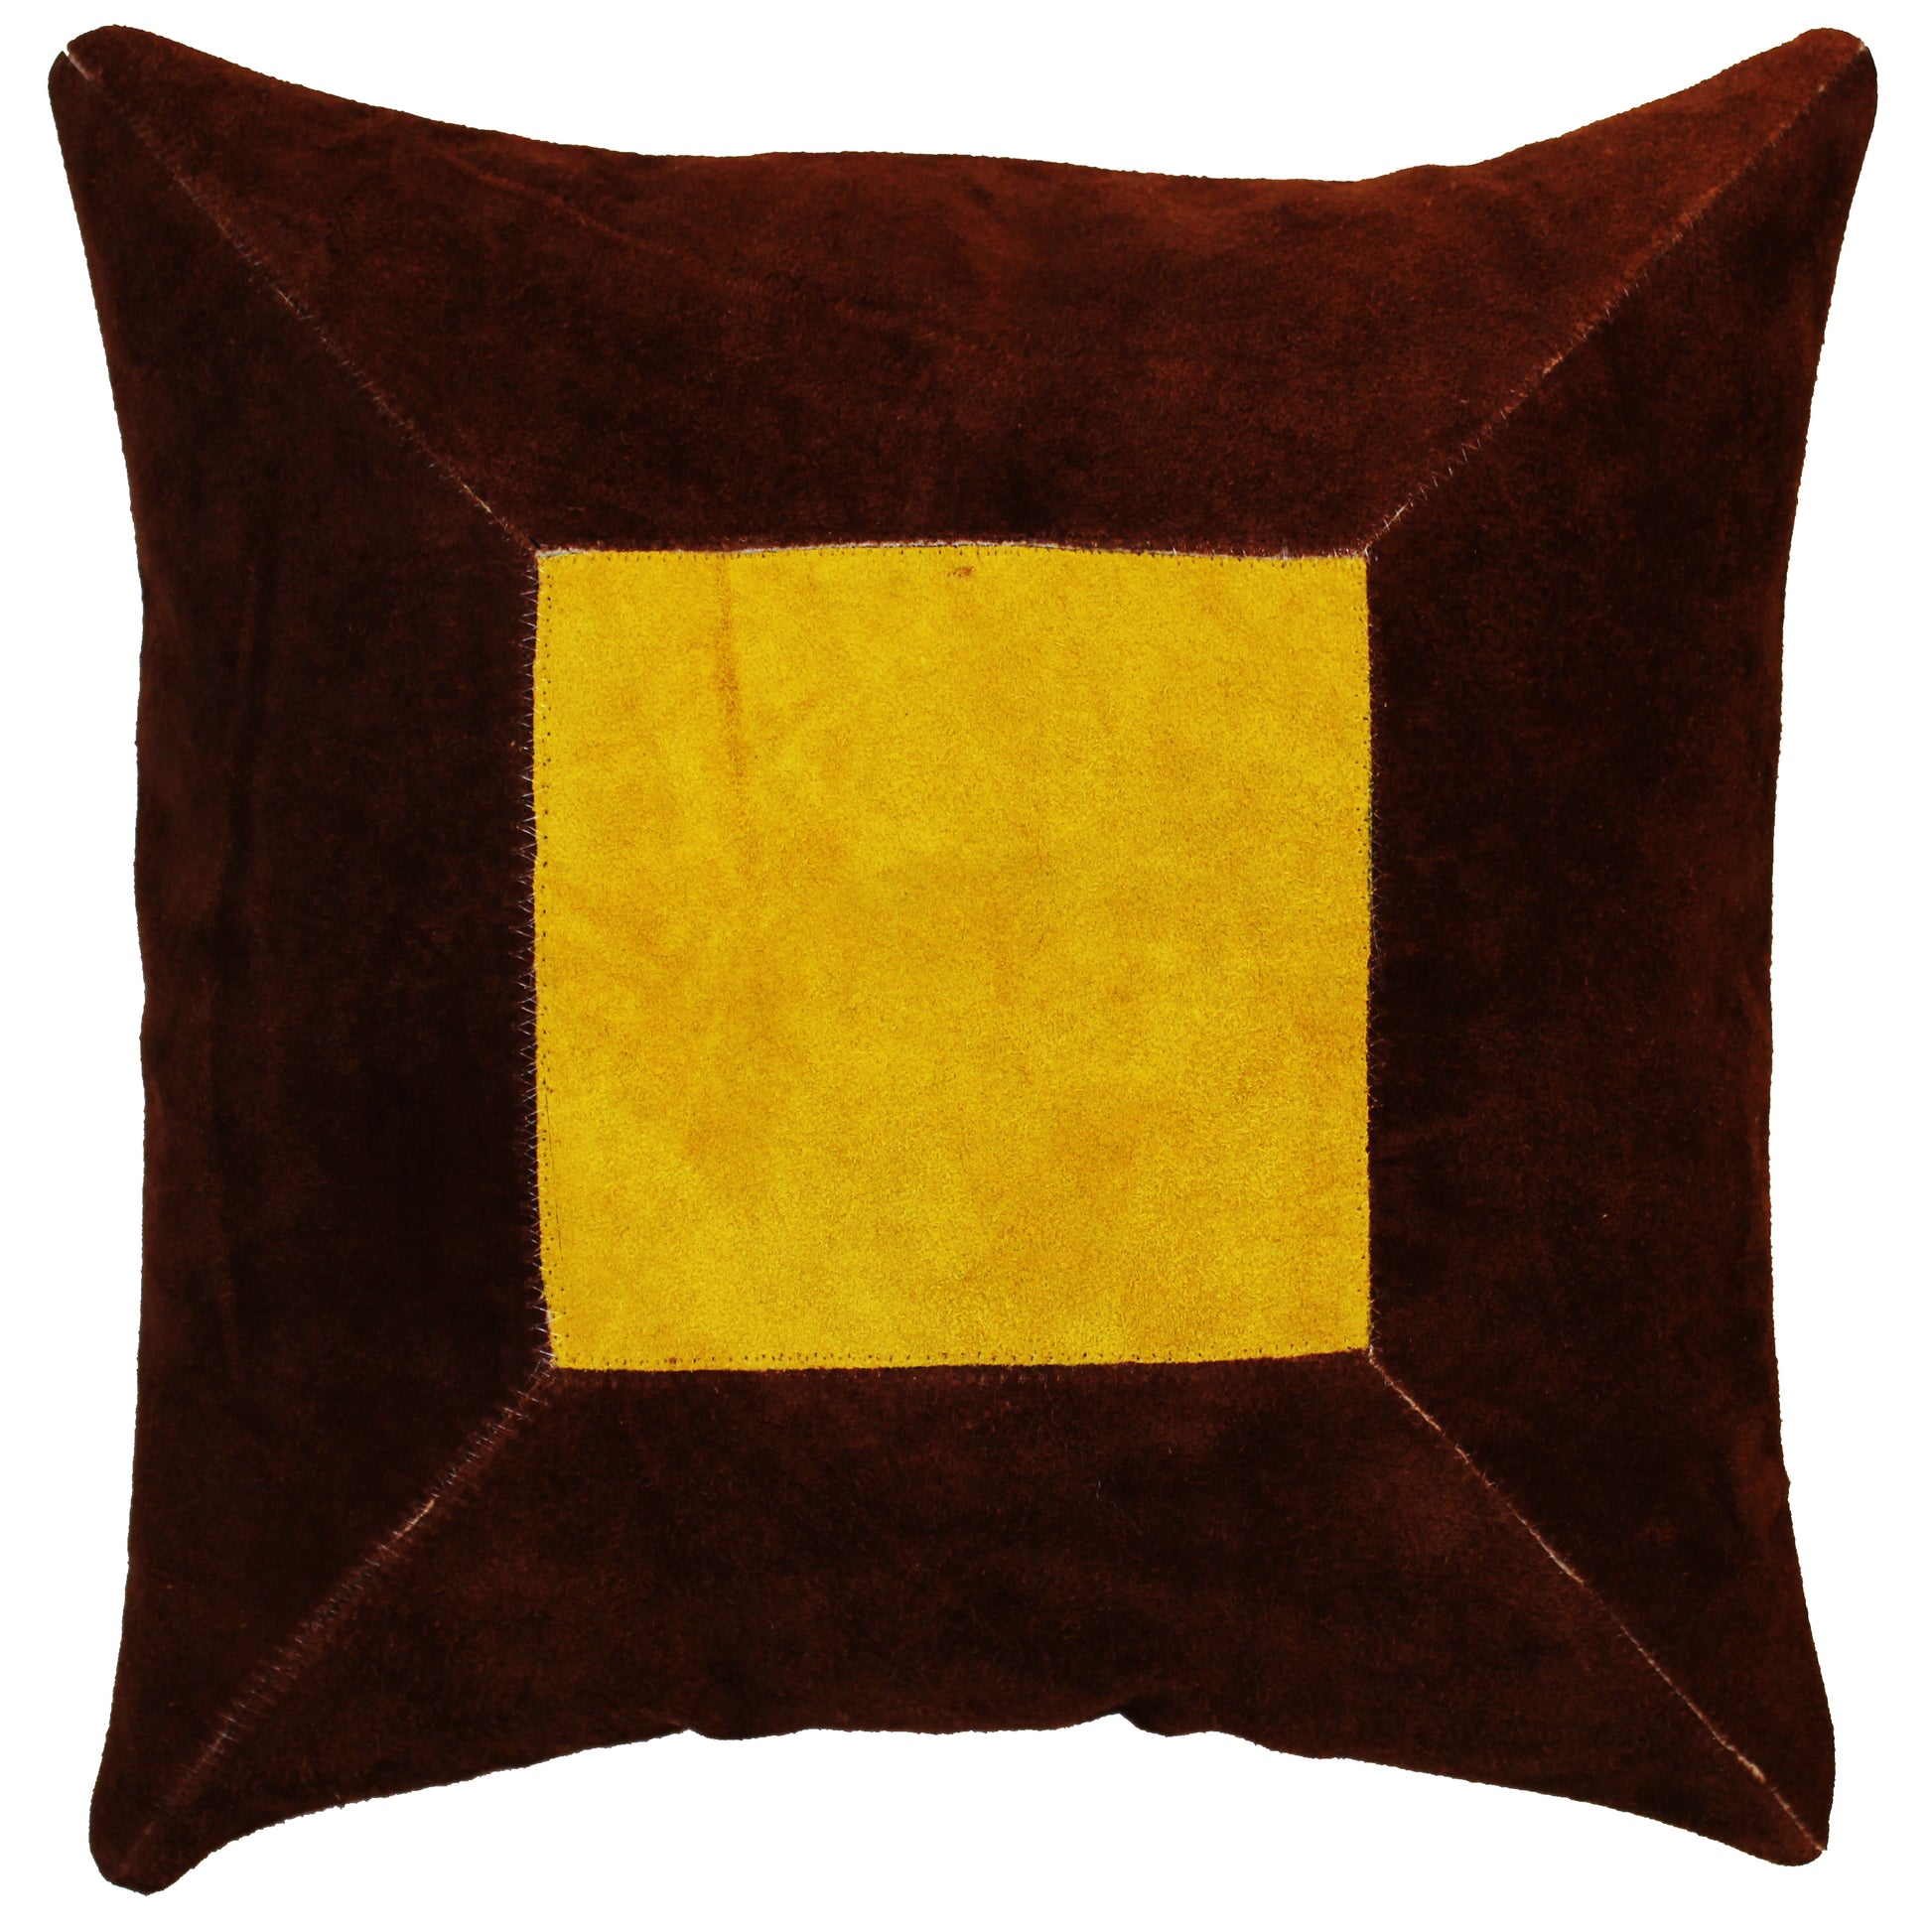 Natural Geo Prolific Leather Suede Brown/Yellow Square Decorative Throw Pillow